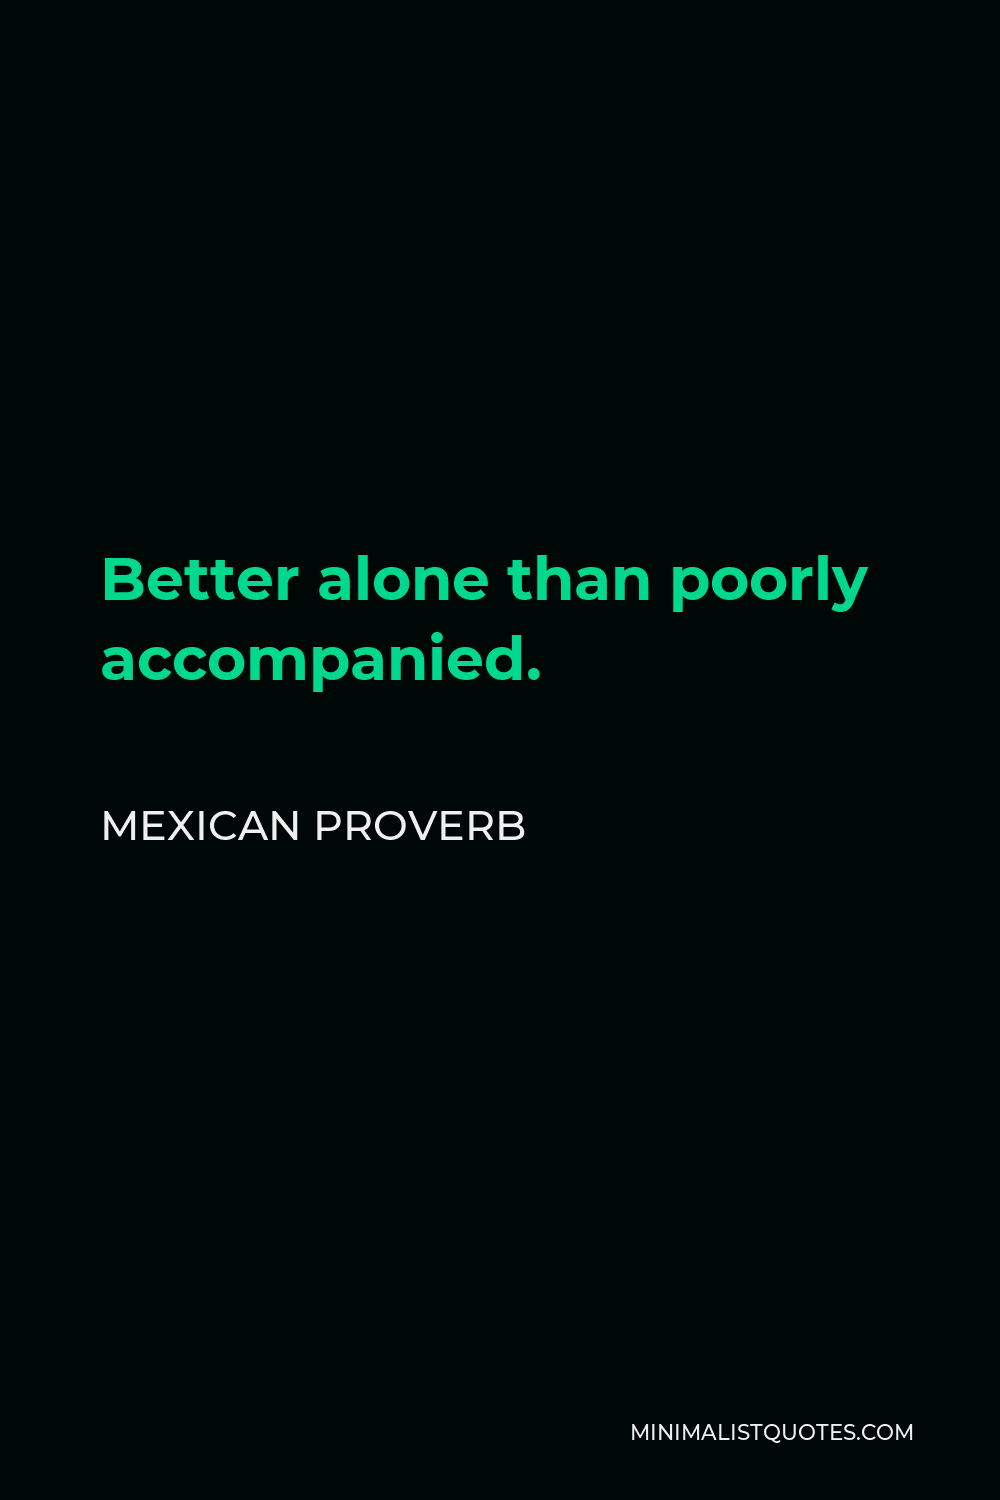 Mexican Proverb Quote - Better alone than poorly accompanied.